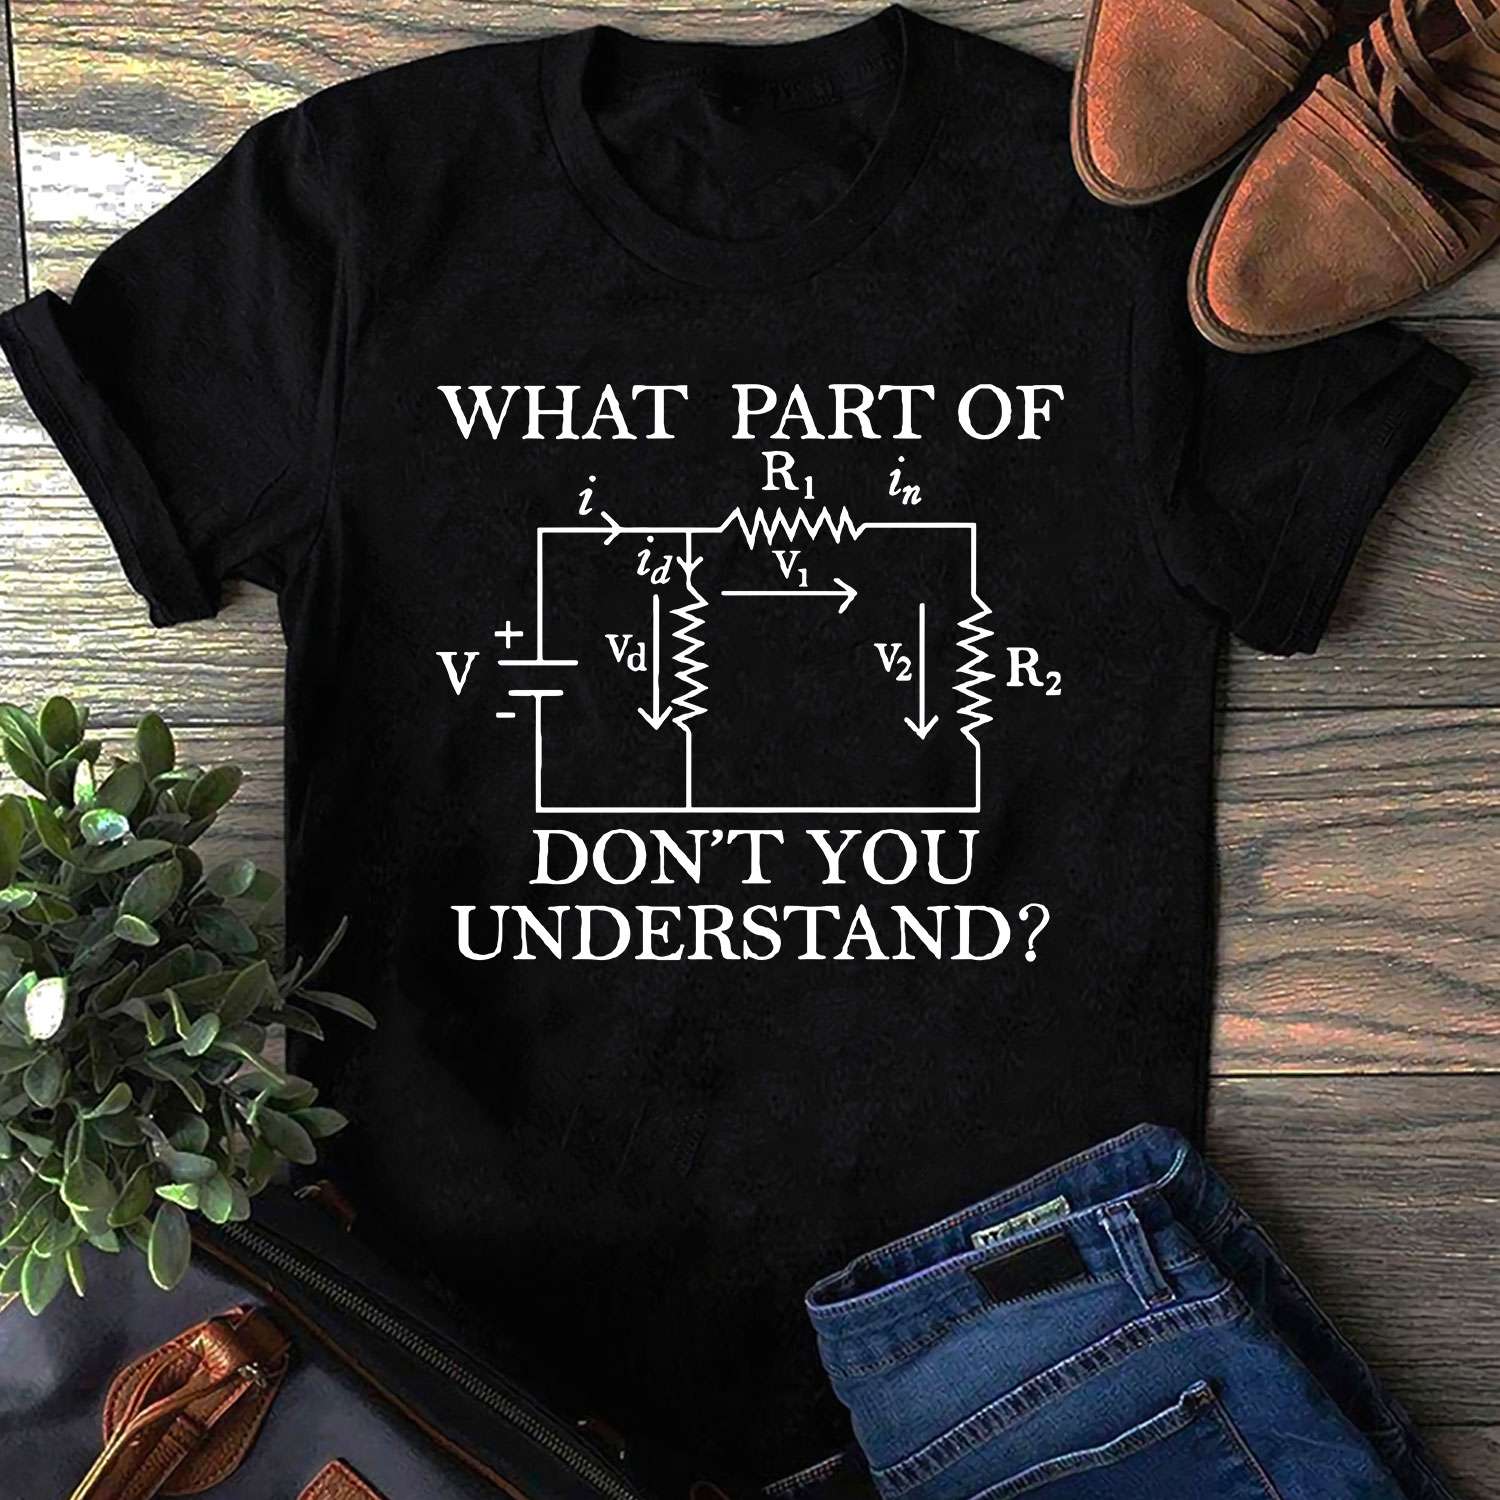 Physical Circuit Diagram - What partt of don't you understand